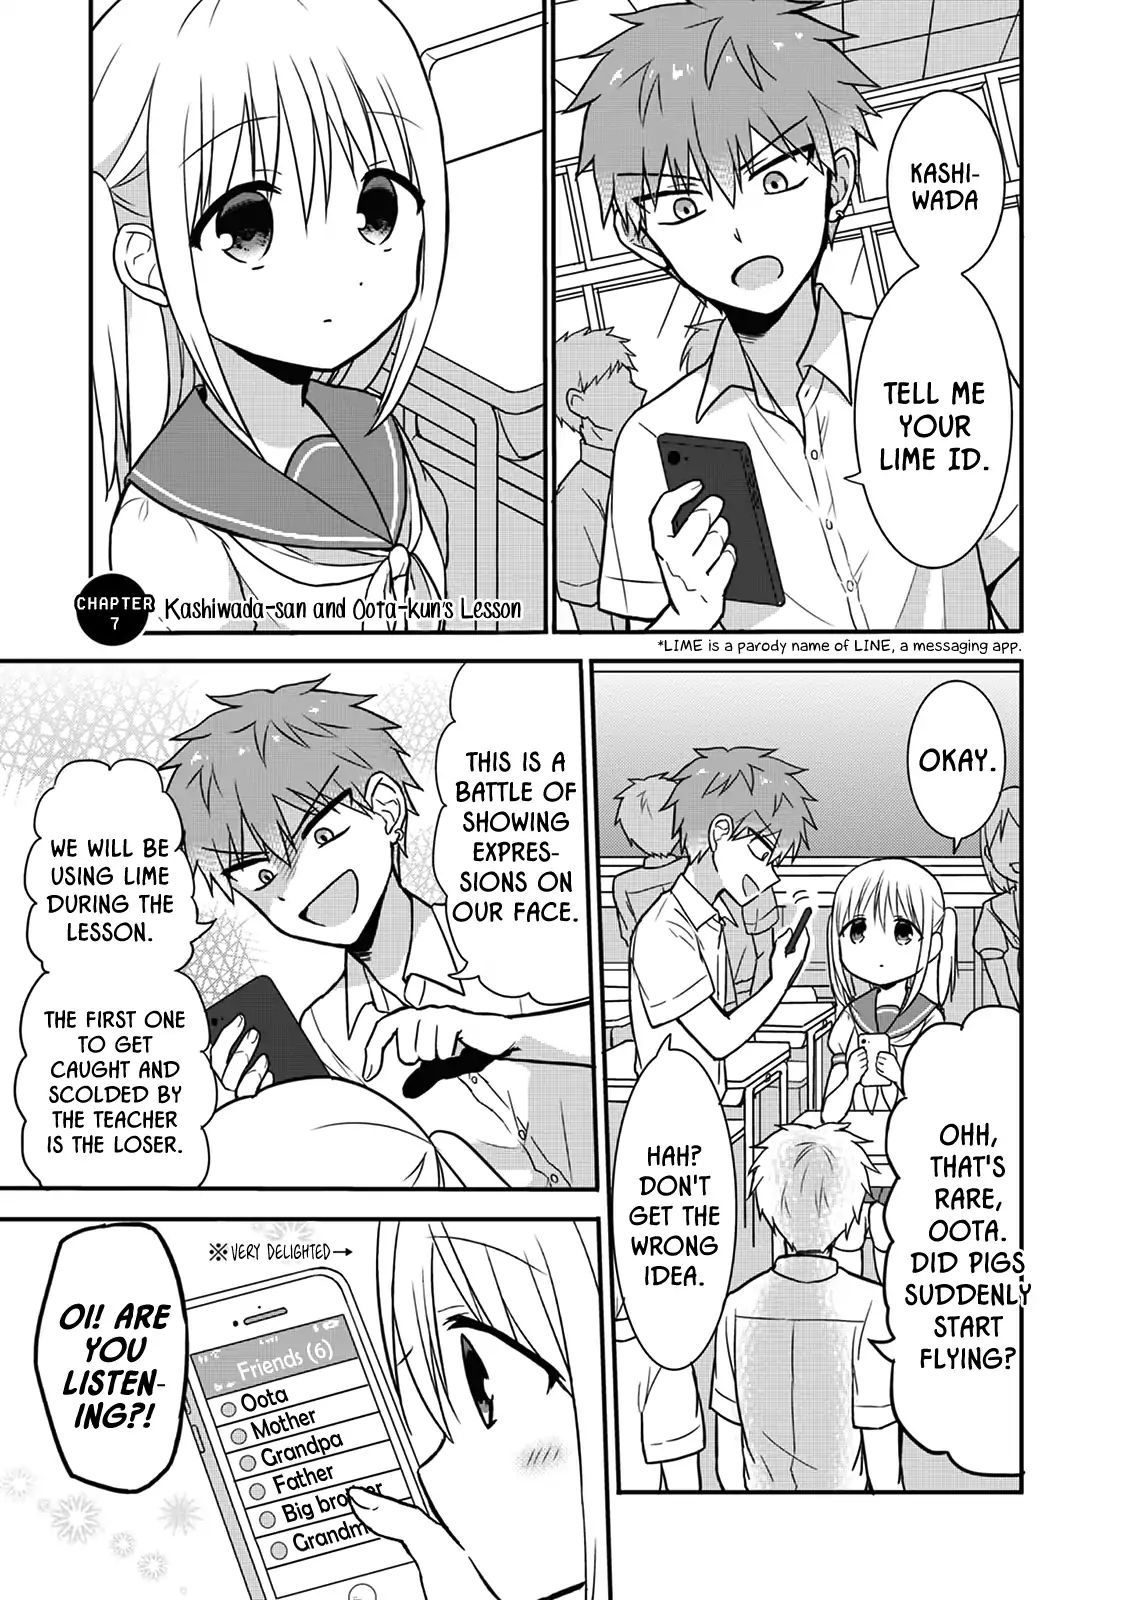 Expressionless Kashiwada-San And Emotional Oota-Kun Chapter 7: Kashiwada-San And Oota-Kun's Lesson - Picture 1